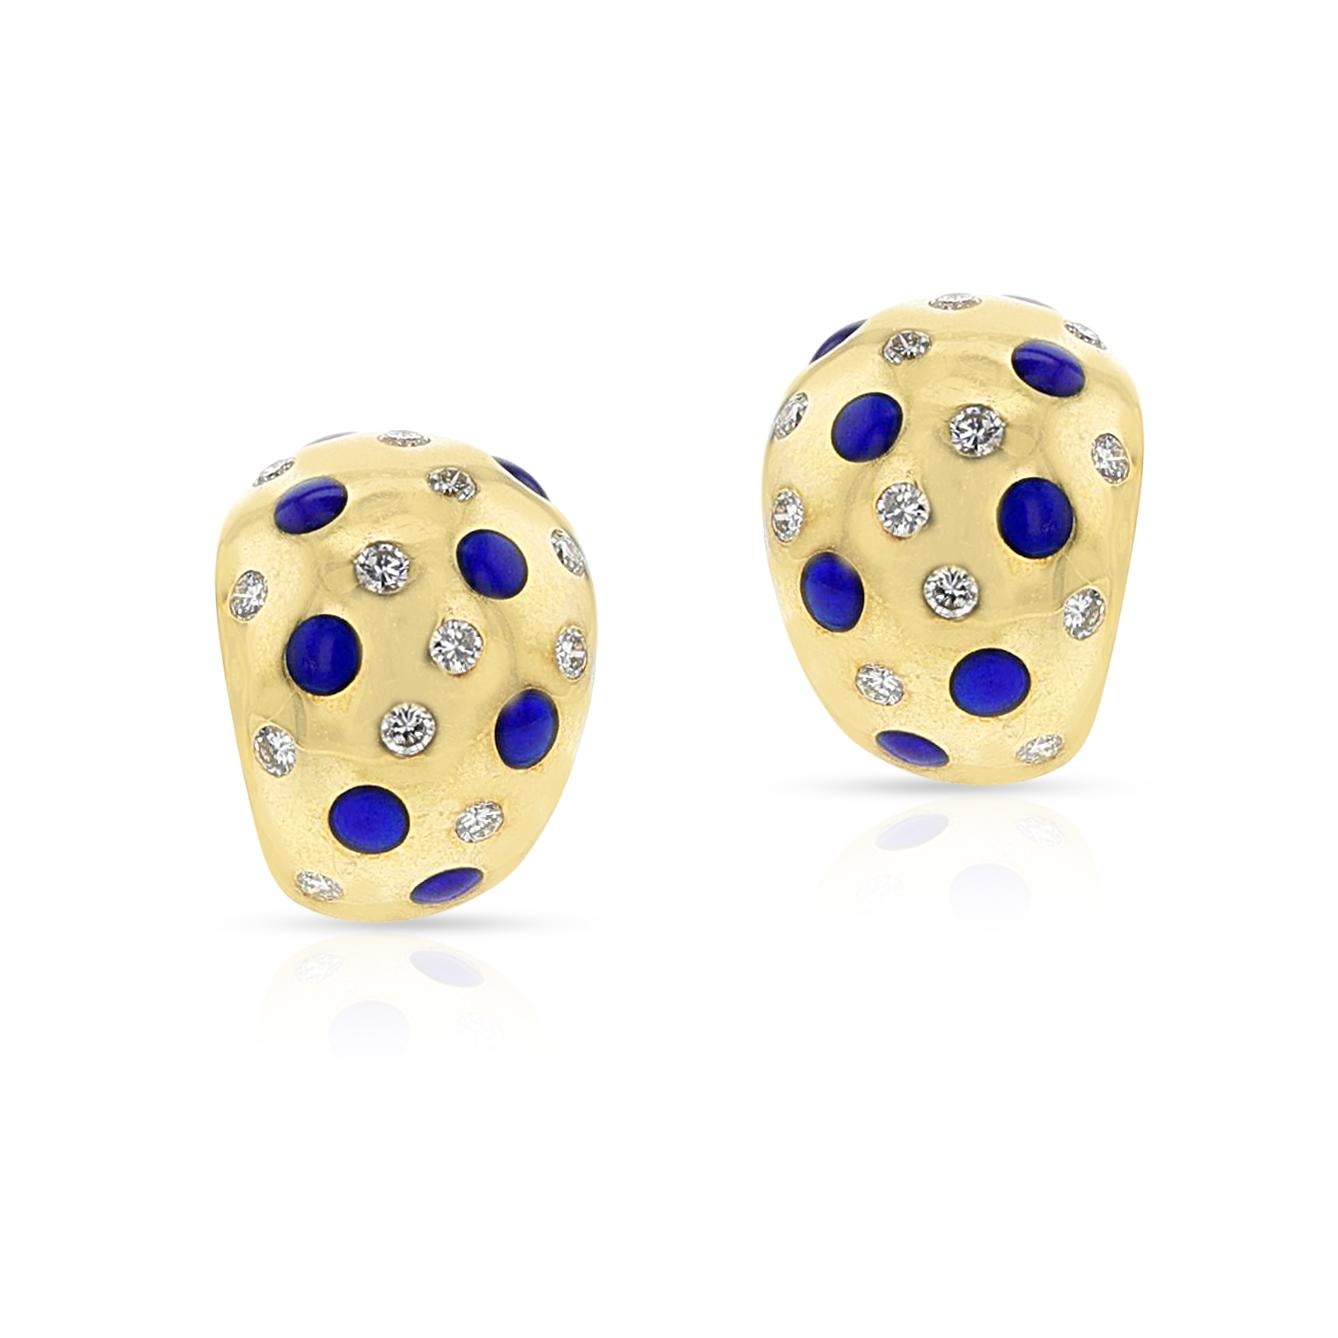 Van Cleef & Arpels Plique a Jour Enamel and Diamond Earring and Ring Set, 18k In Excellent Condition For Sale In New York, NY